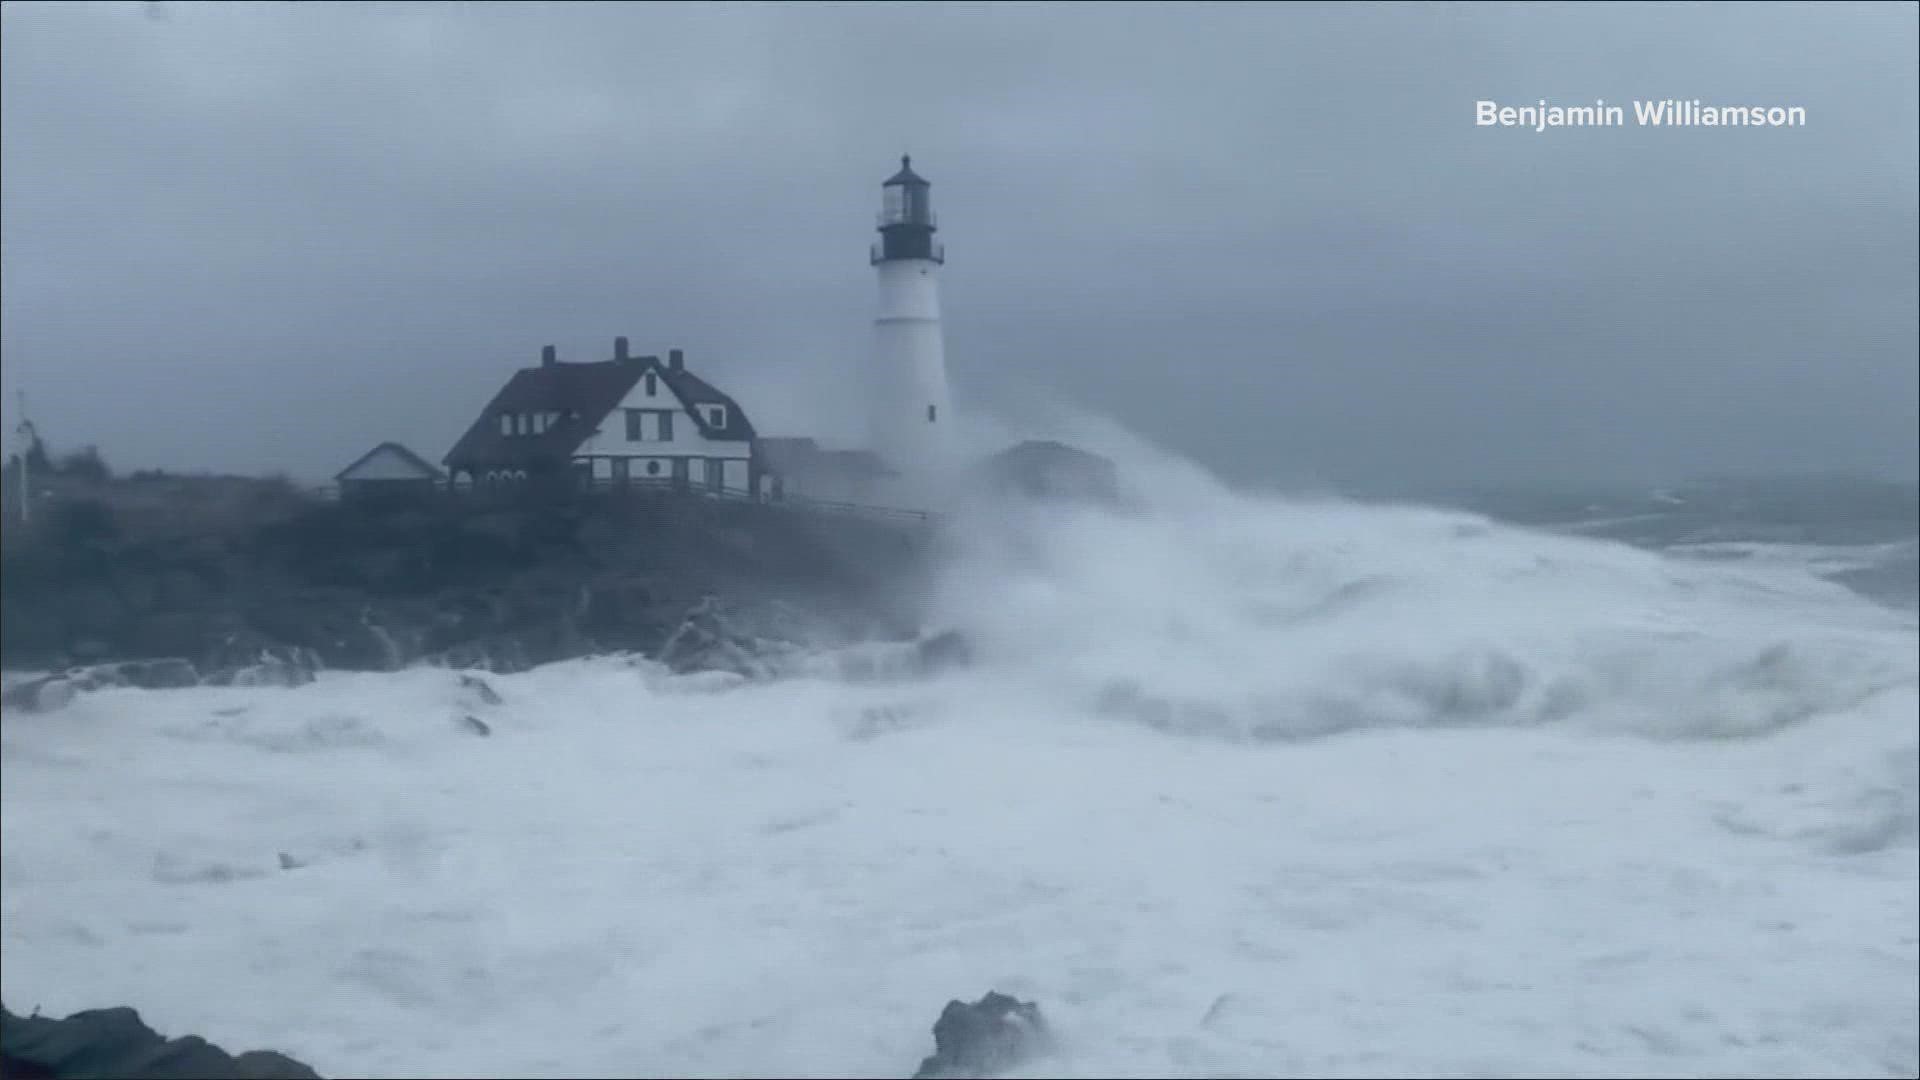 Portland Head Light and Fort Preble both appear to have been damaged by high winds last week.